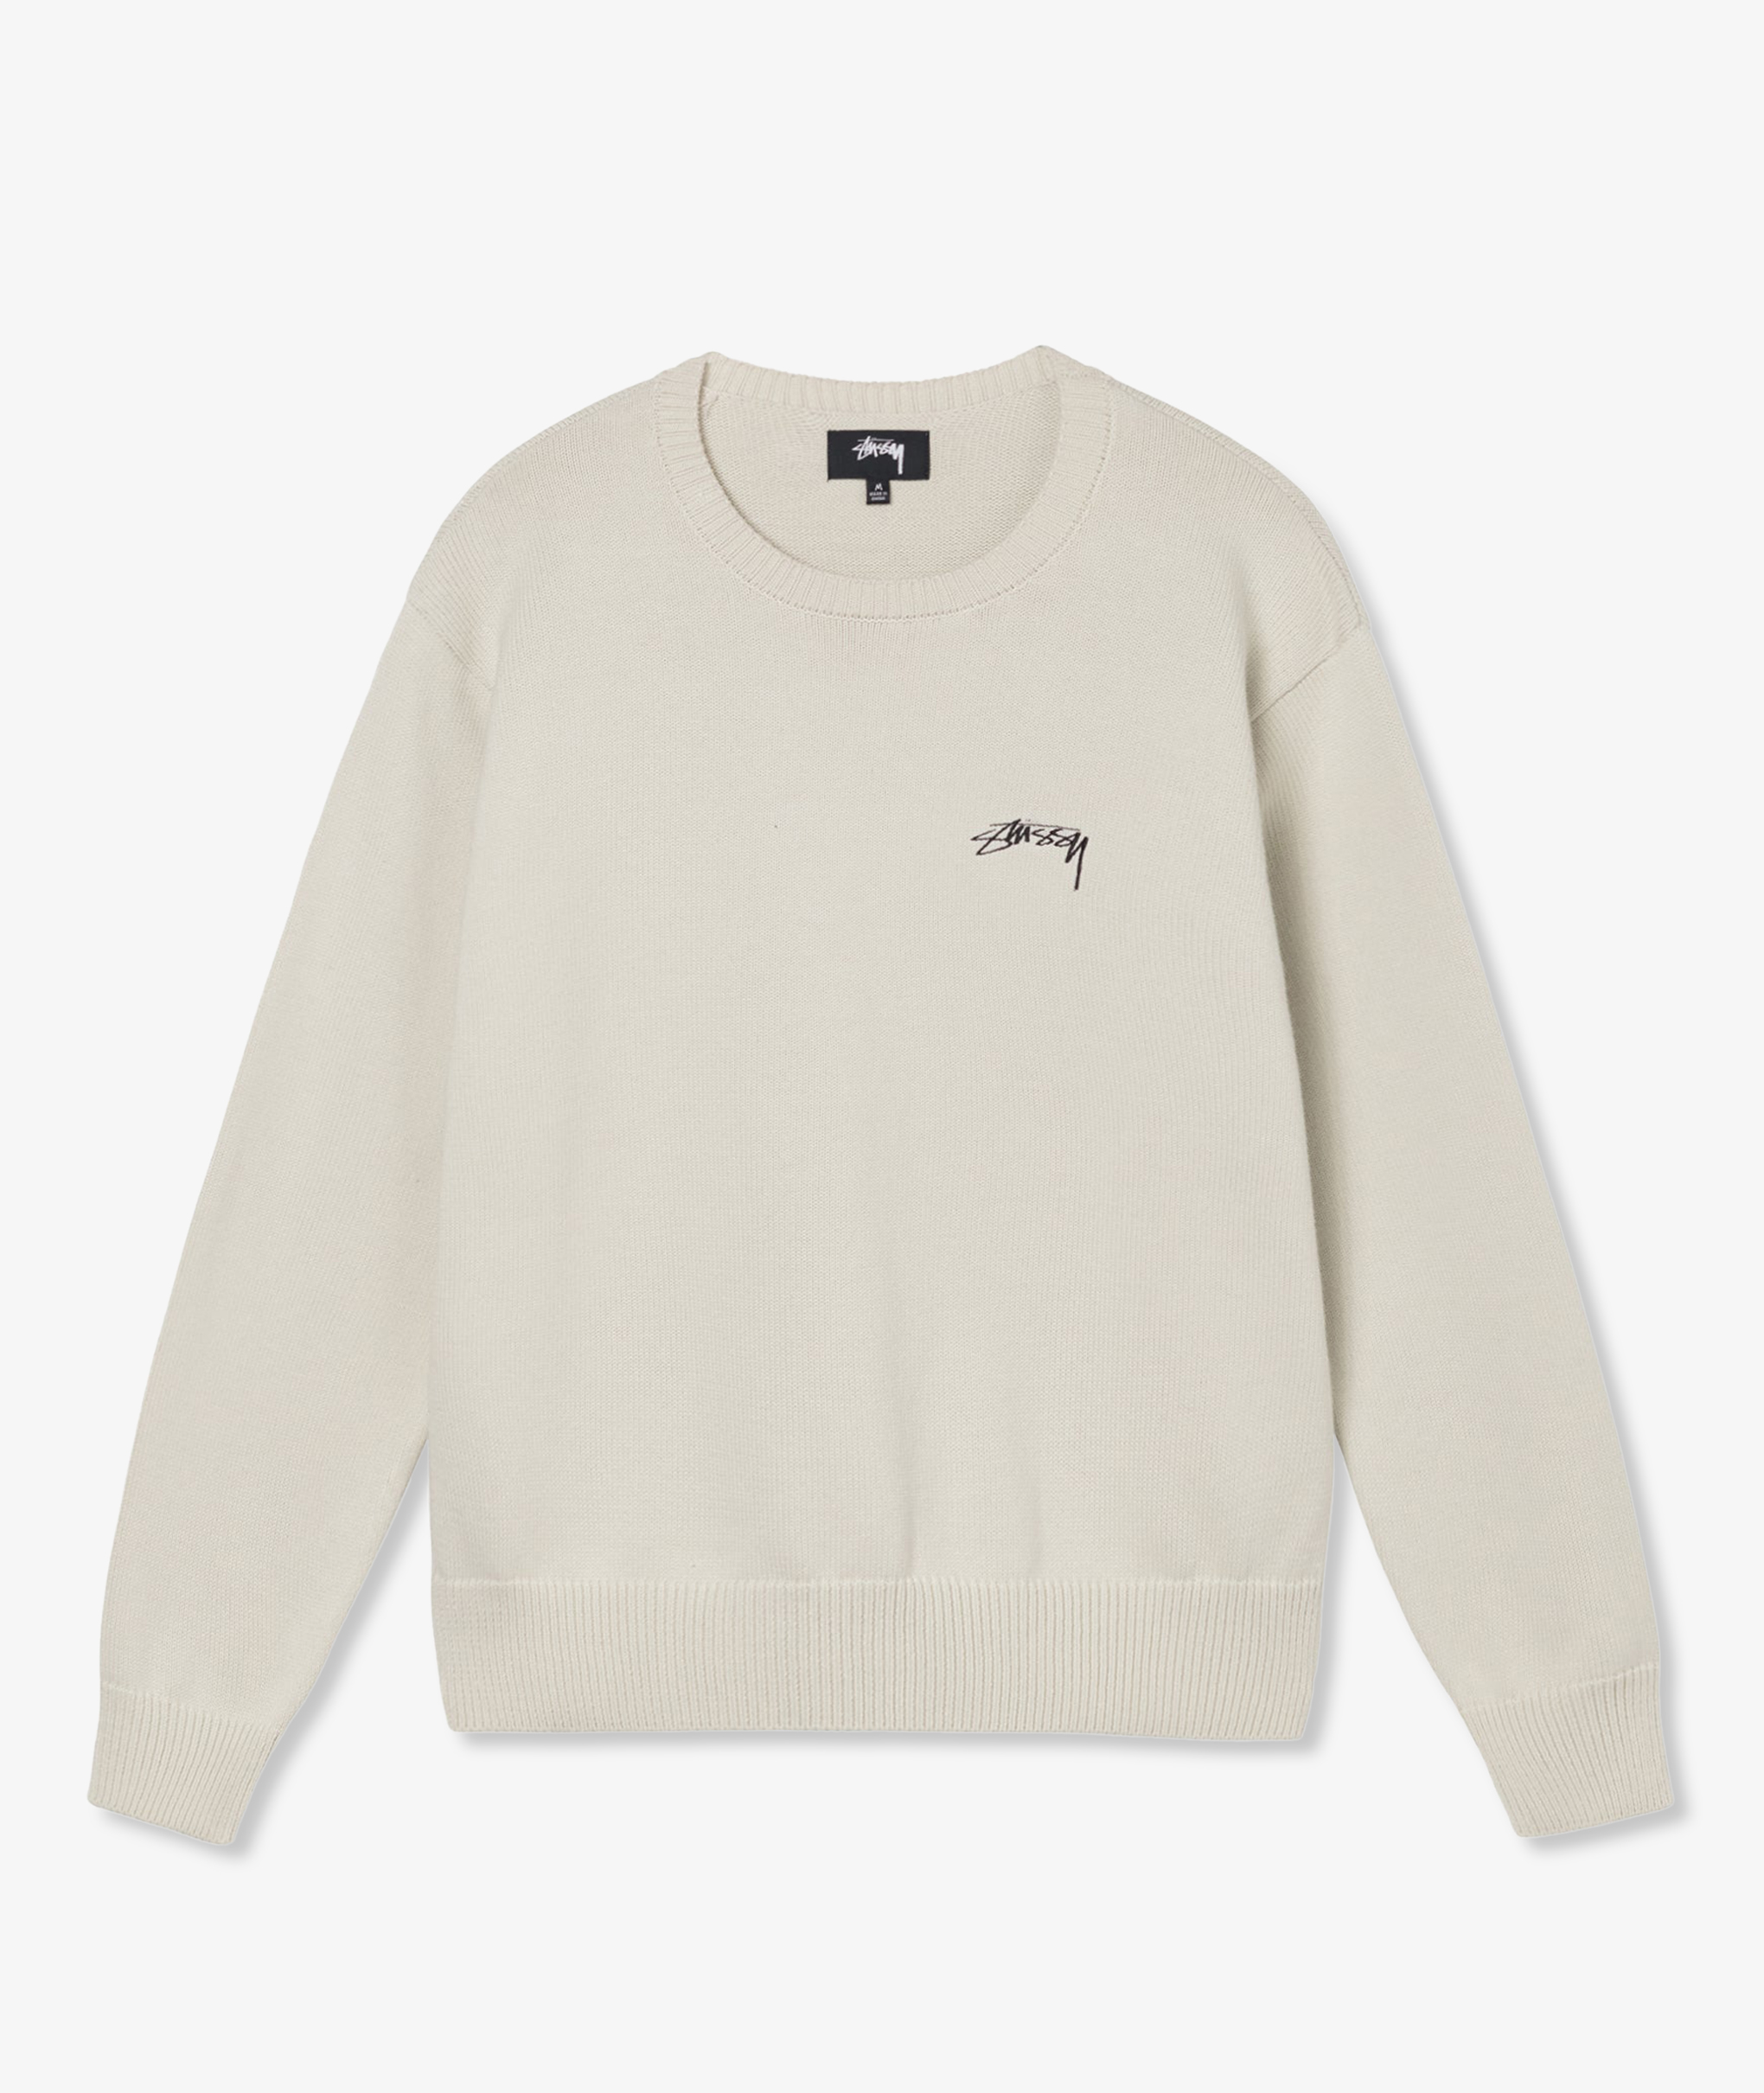 Norse Store  Shipping Worldwide - Stussy Care Label Sweater - Natural